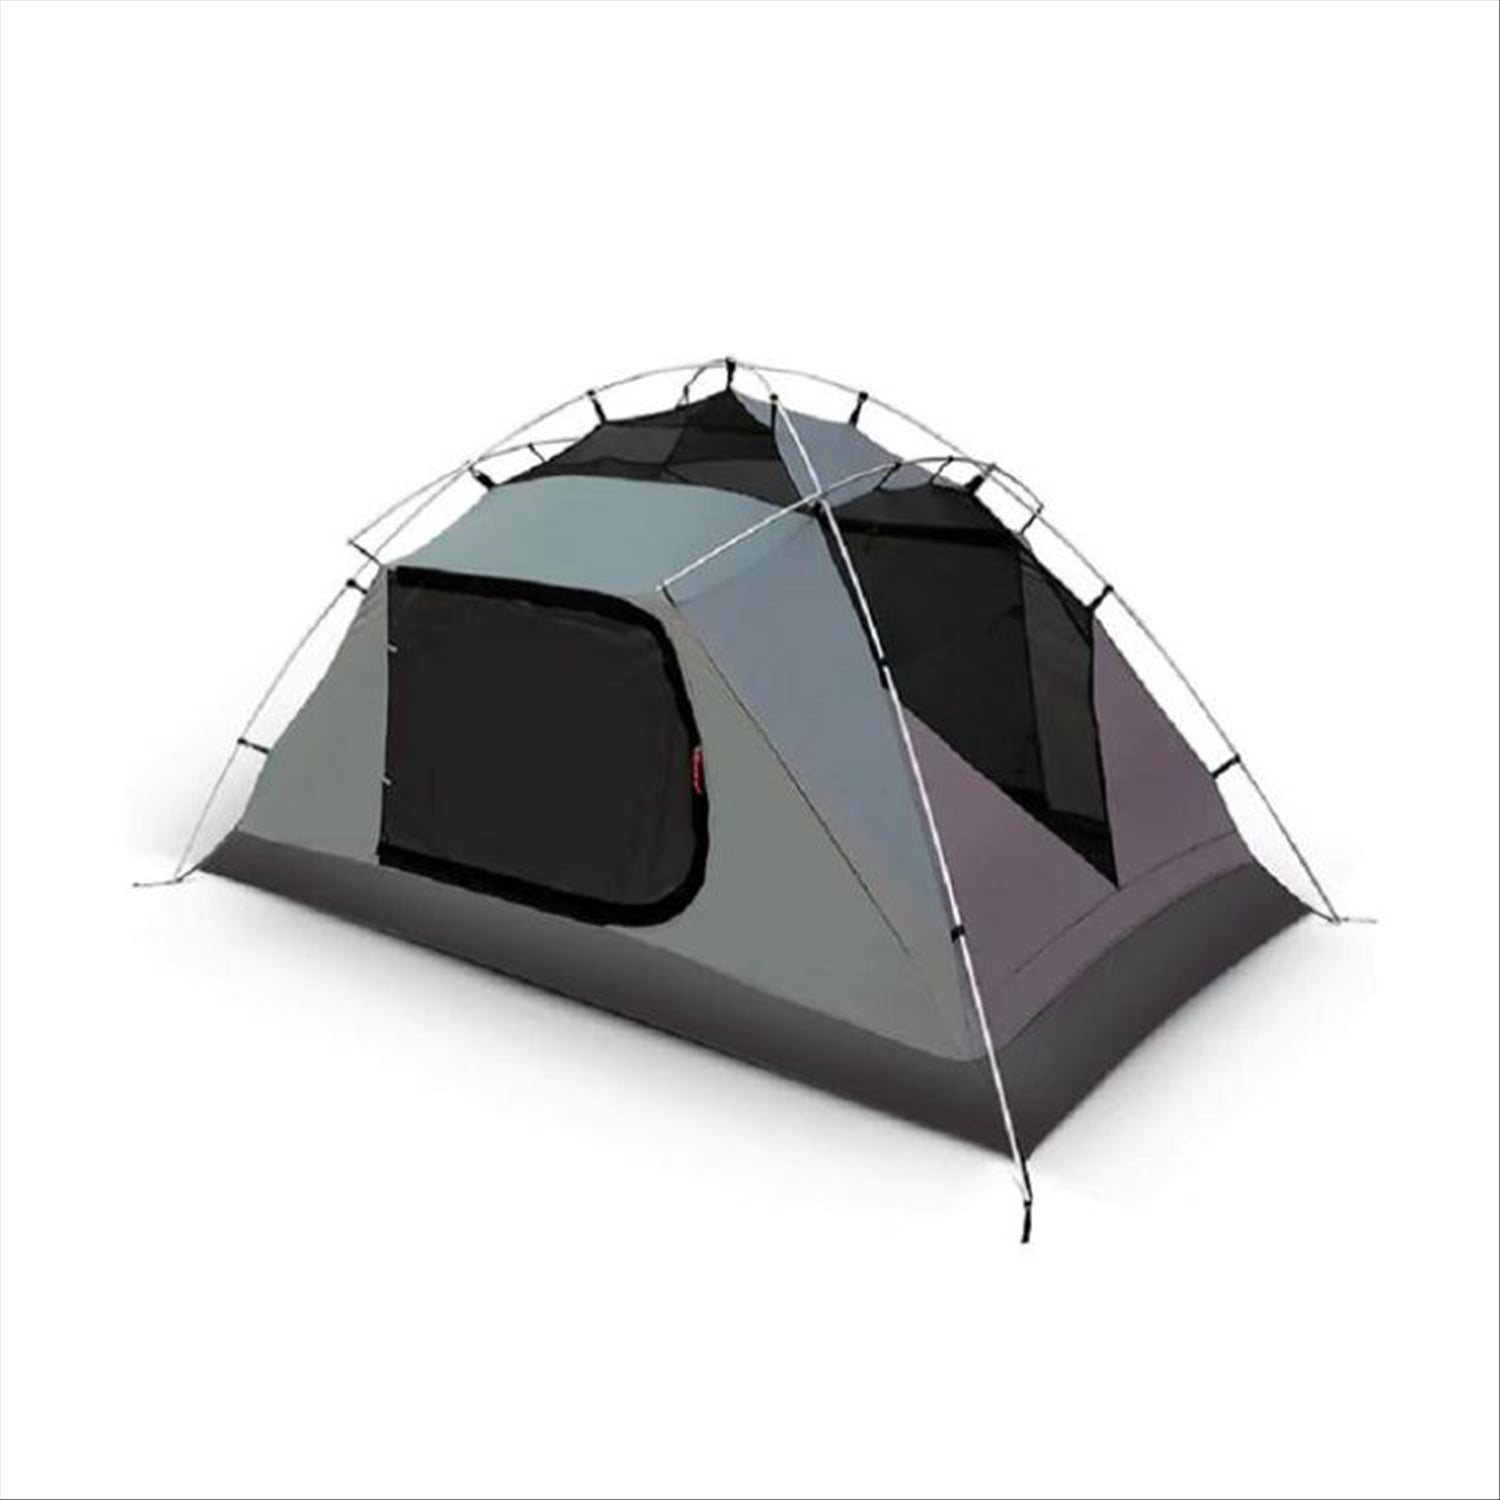 Intents Outdoors Titan 2 -'All Weather Series' 2 Person Tent 3.3kg